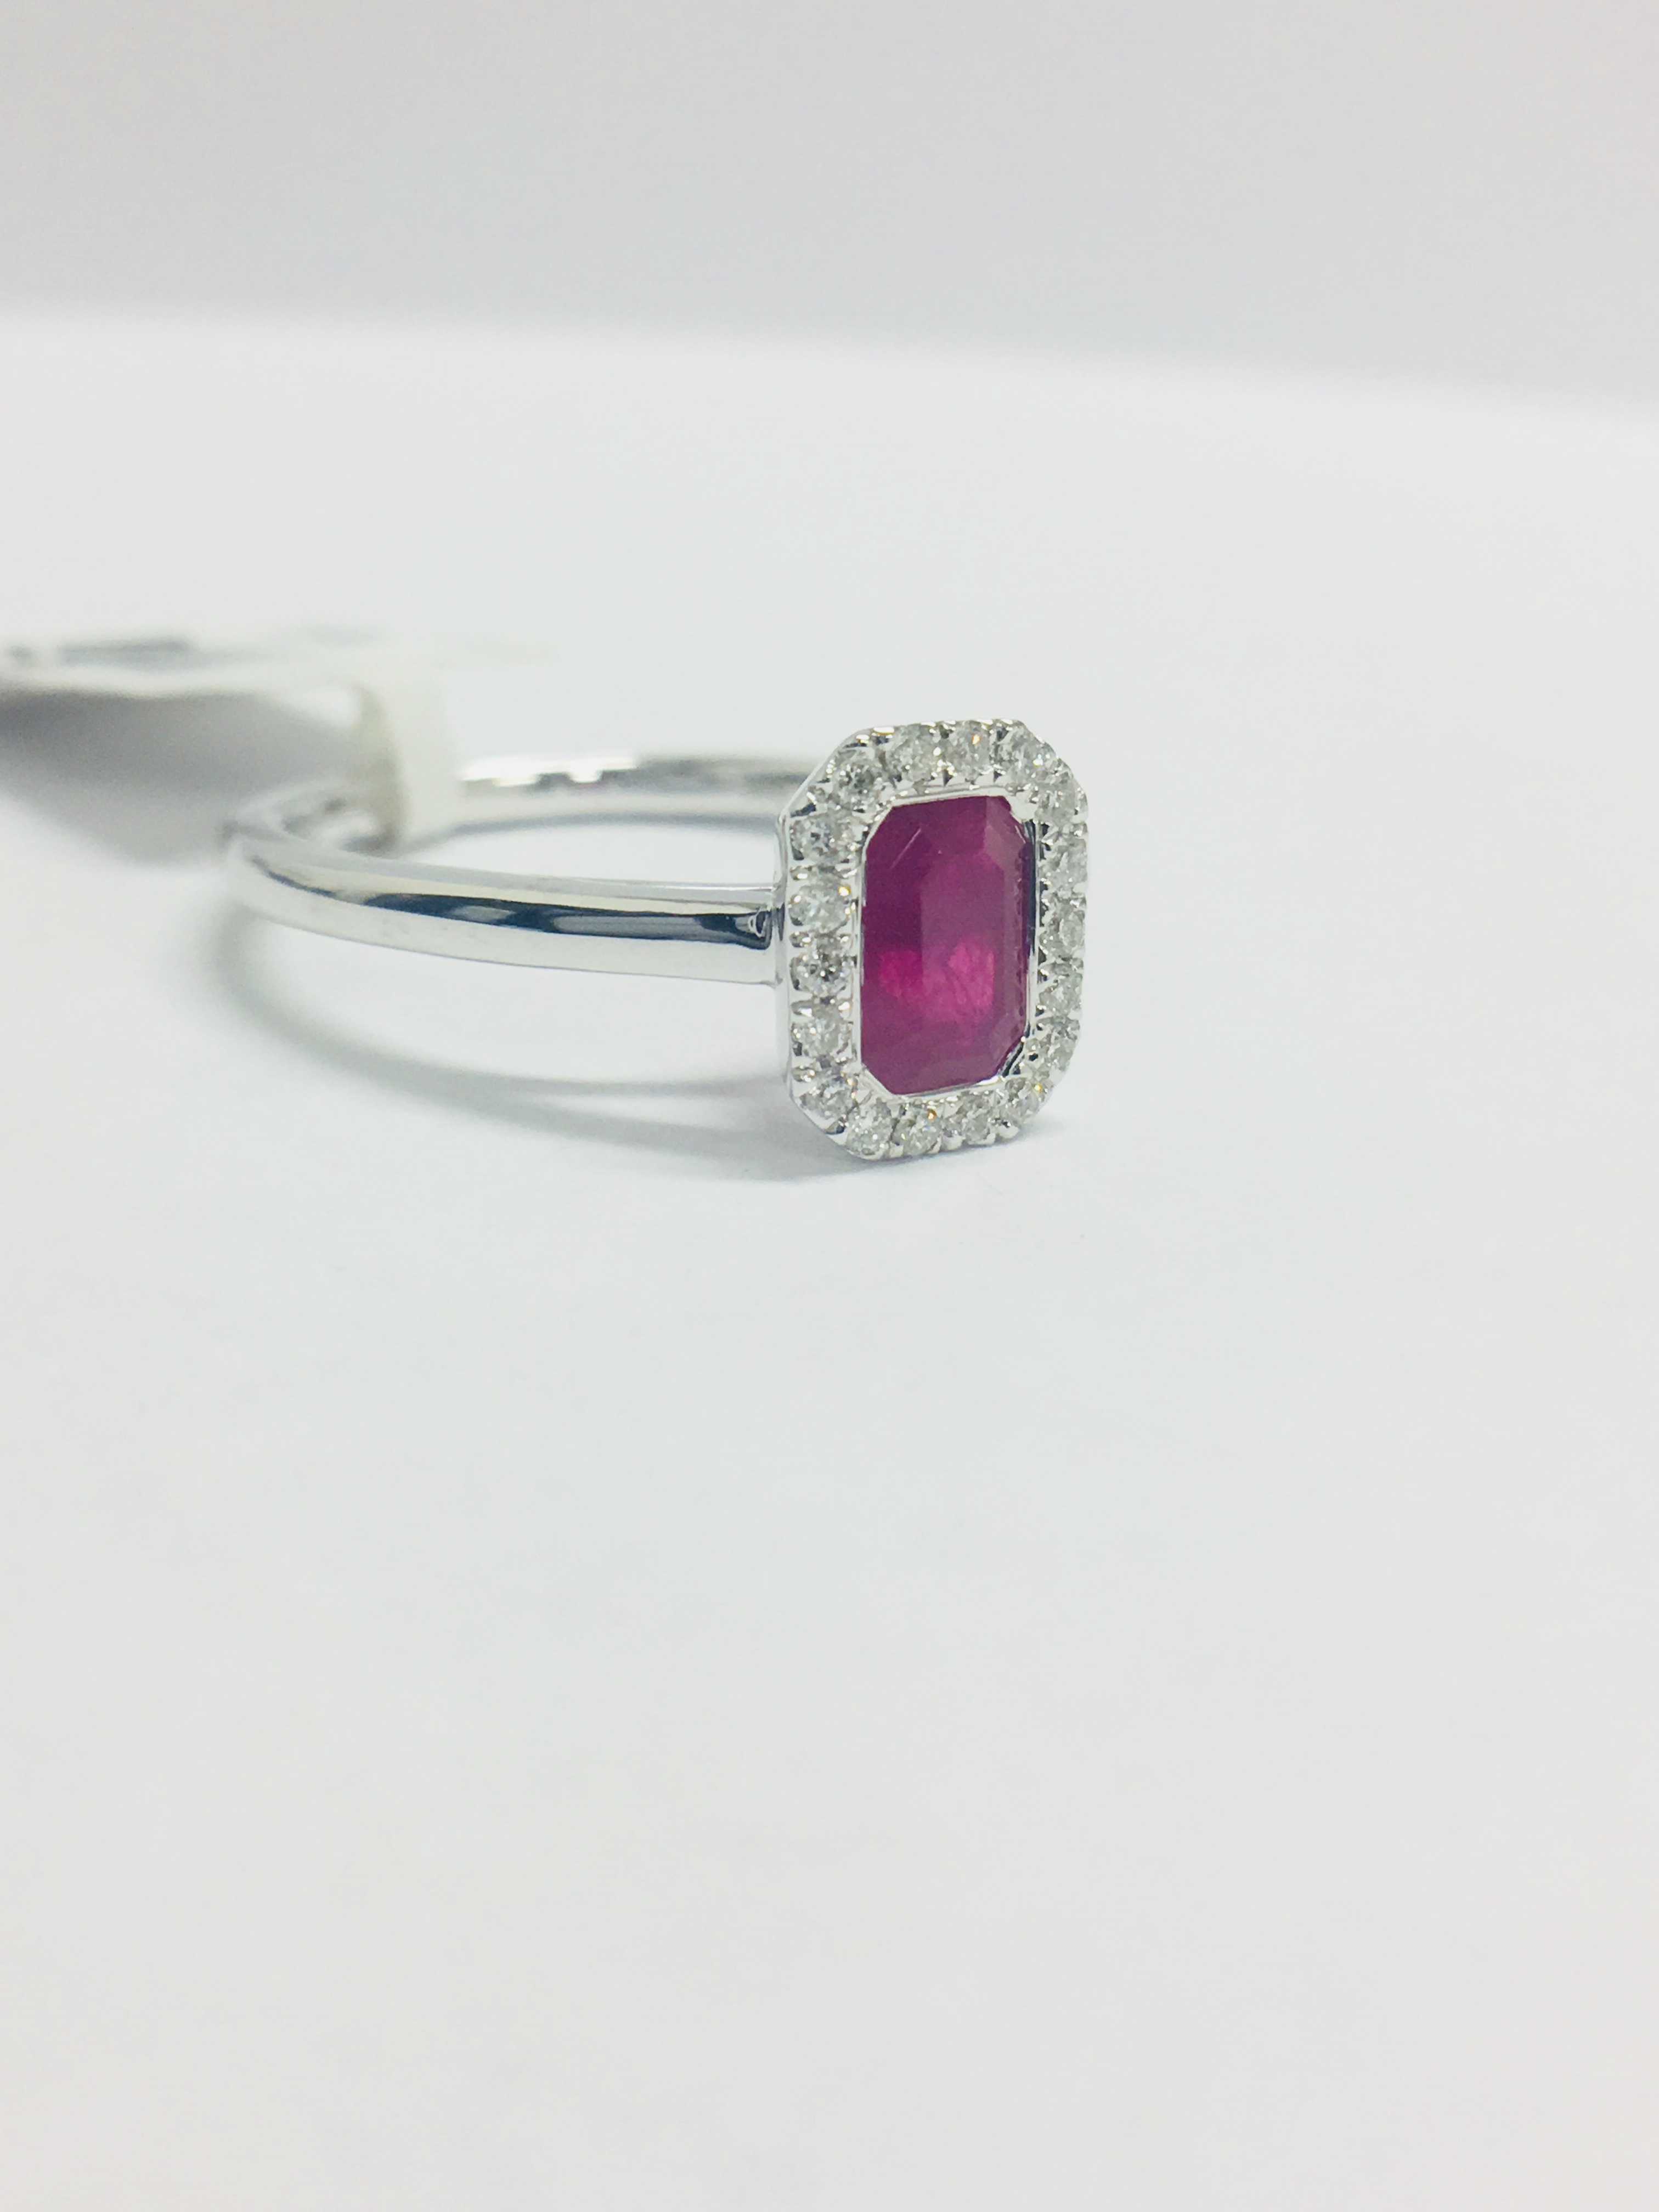 9Ct White Gold Ruby Diamond Cluster Ring, - Image 6 of 7